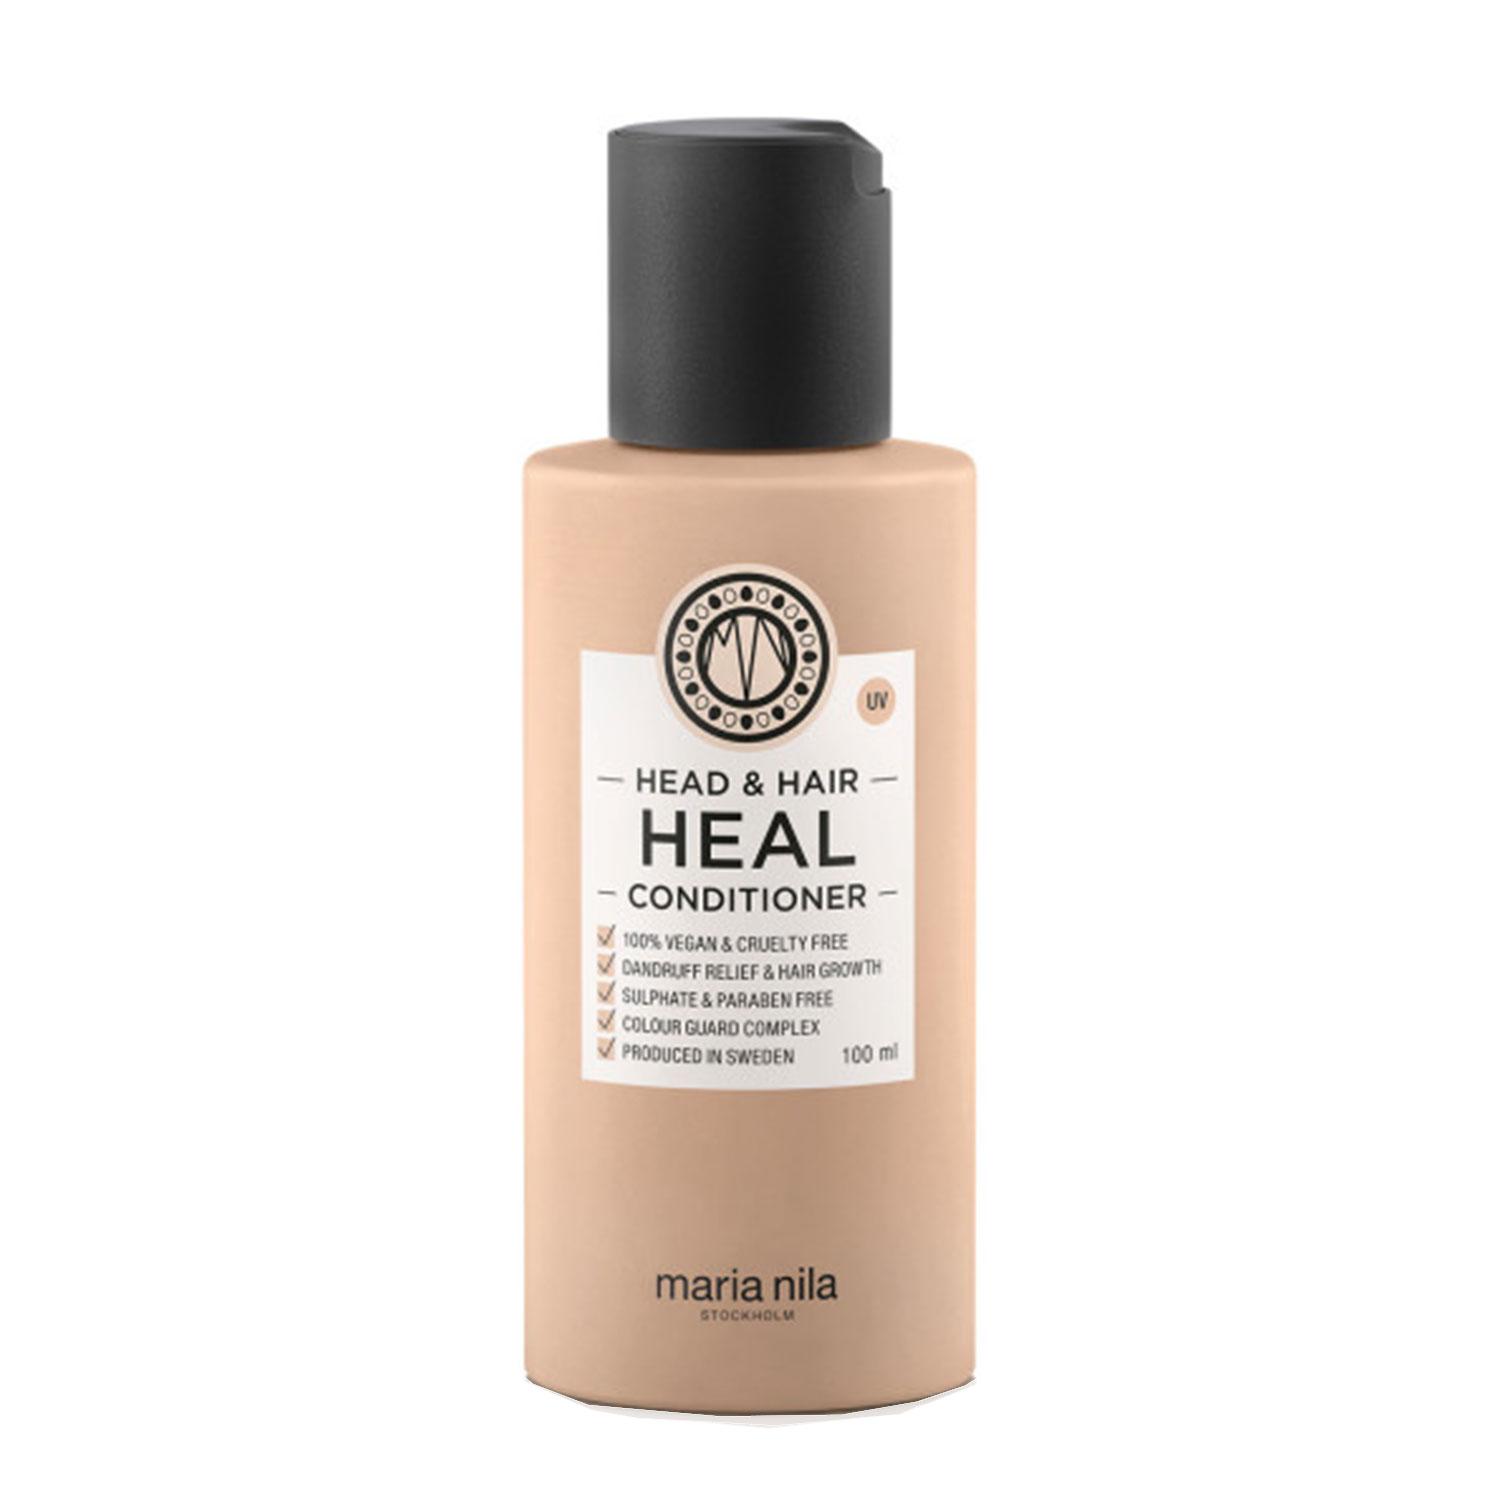 Care & Style - Head & Hair Heal Conditioner